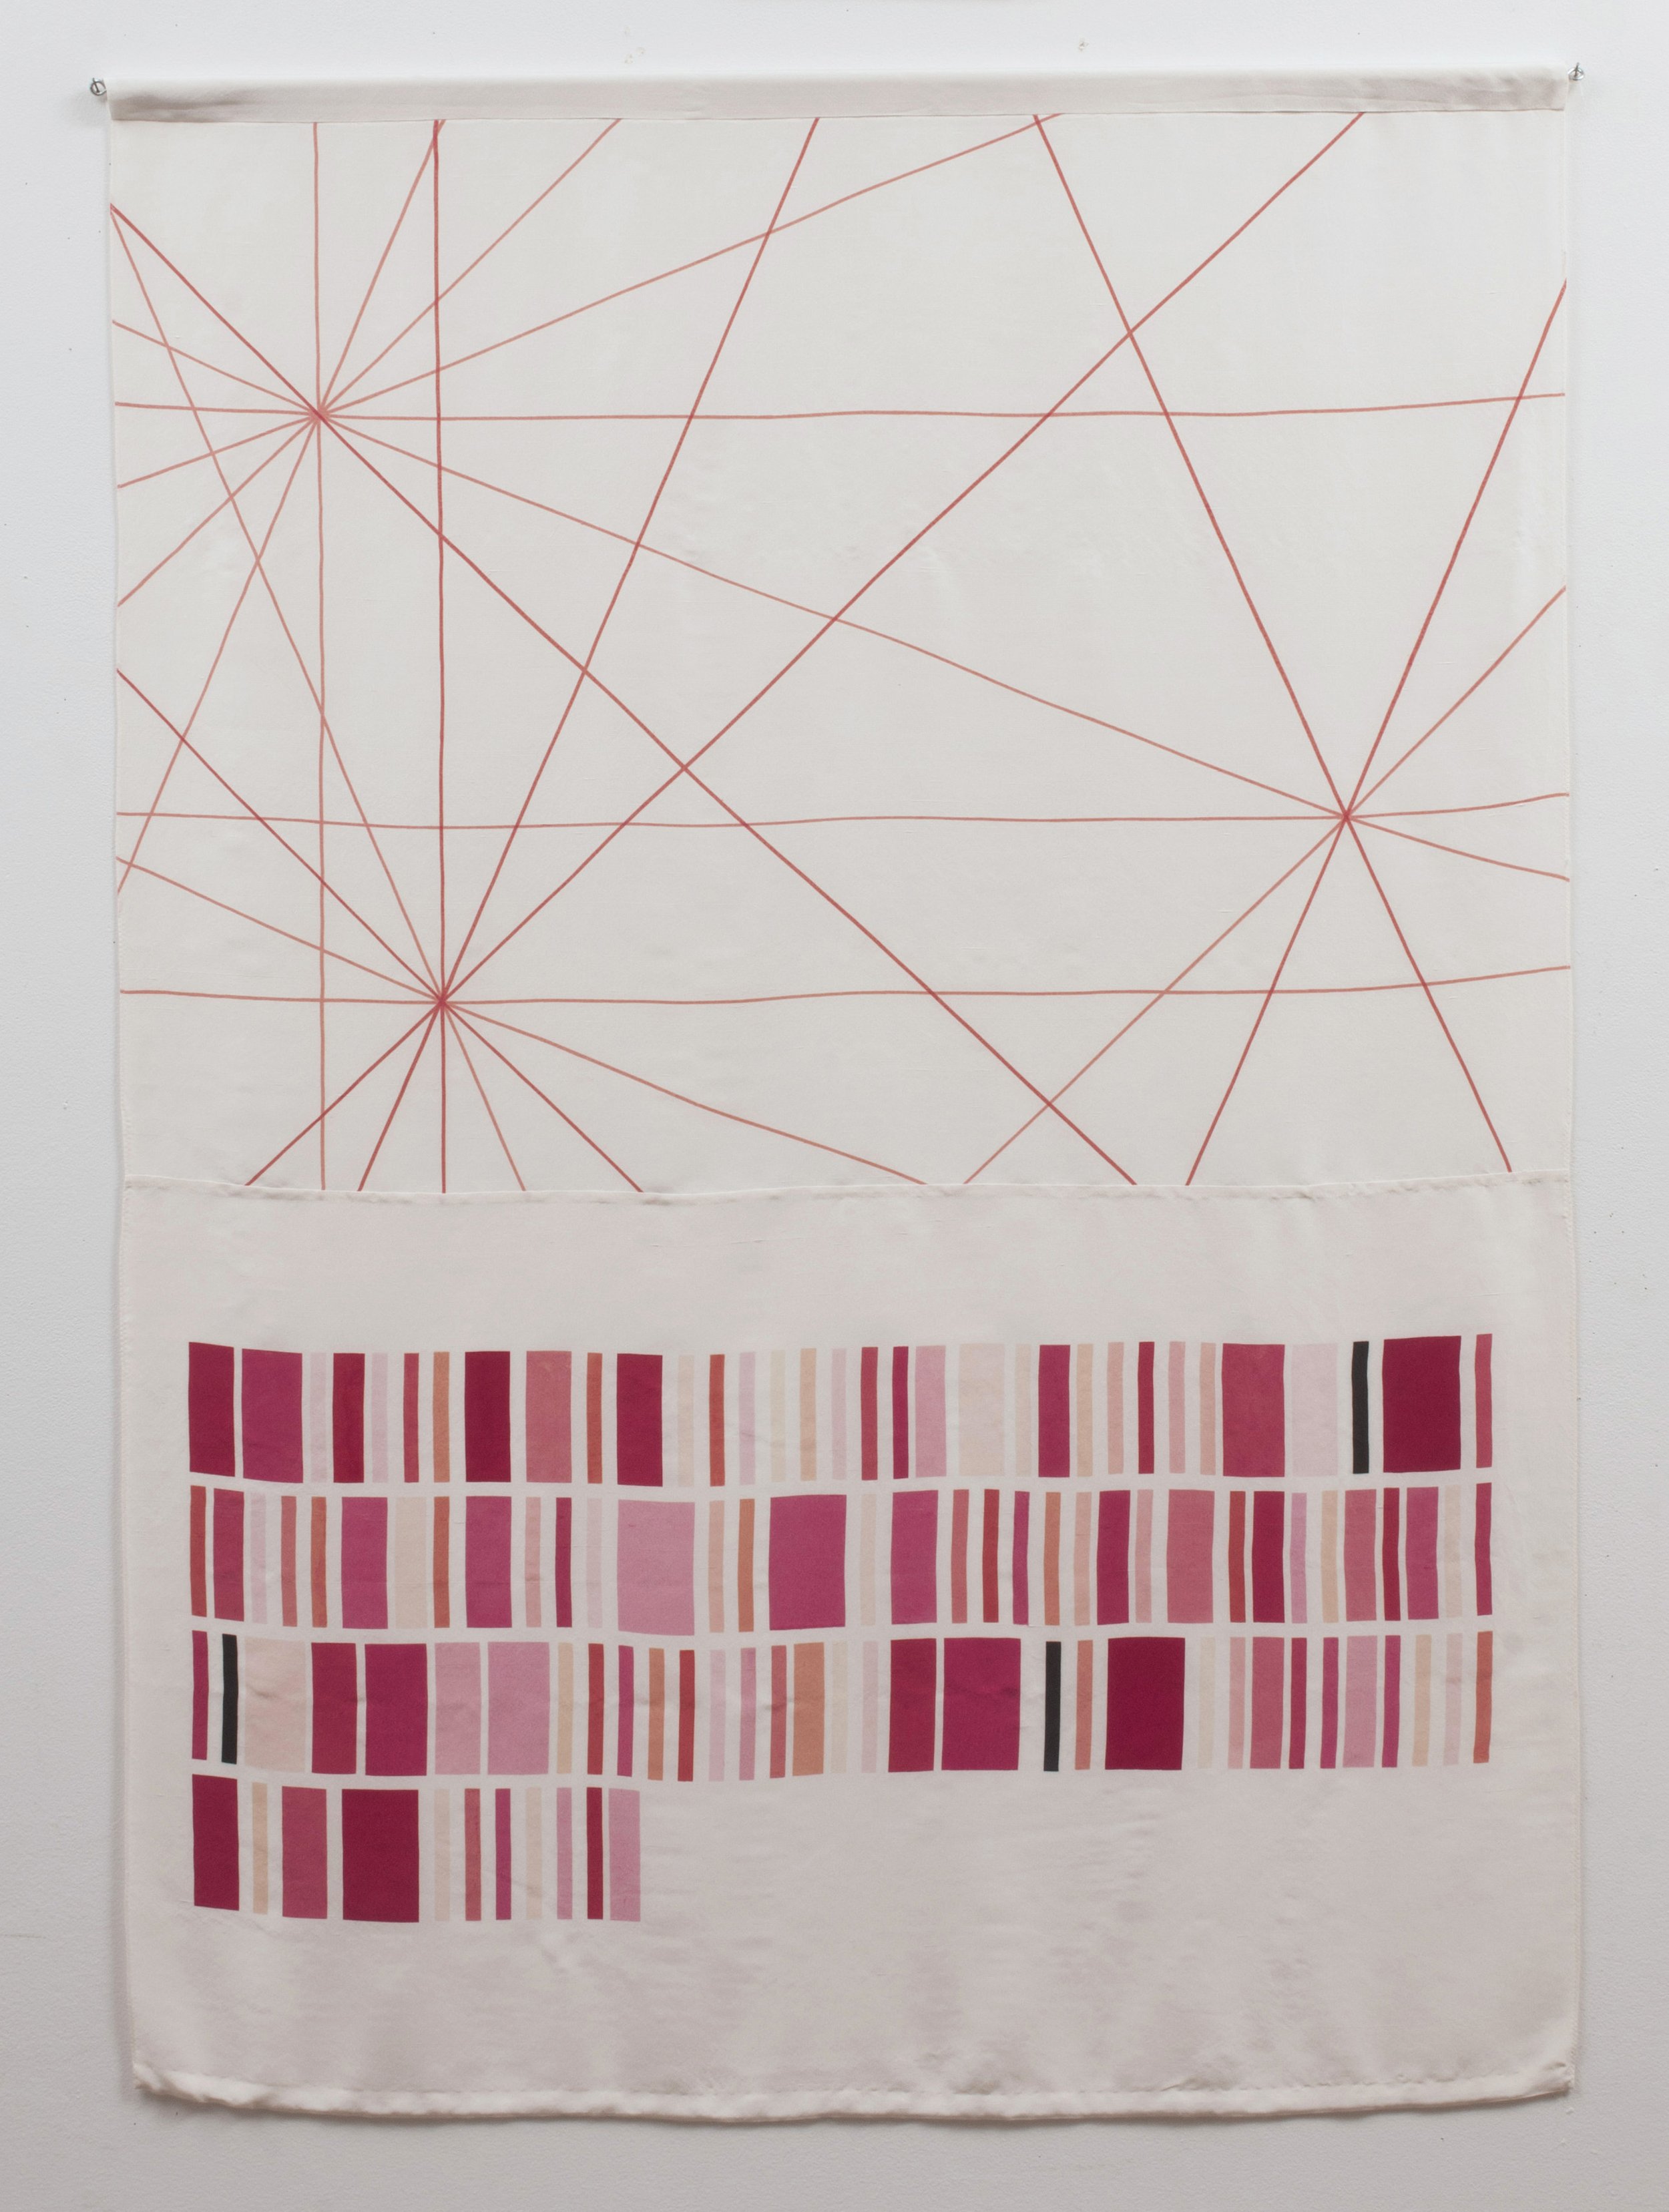  Sarah Hulsey,  Geographia, Paragraph 4  silk screen with hand mixed dyes on silk  72 x 48 inches 